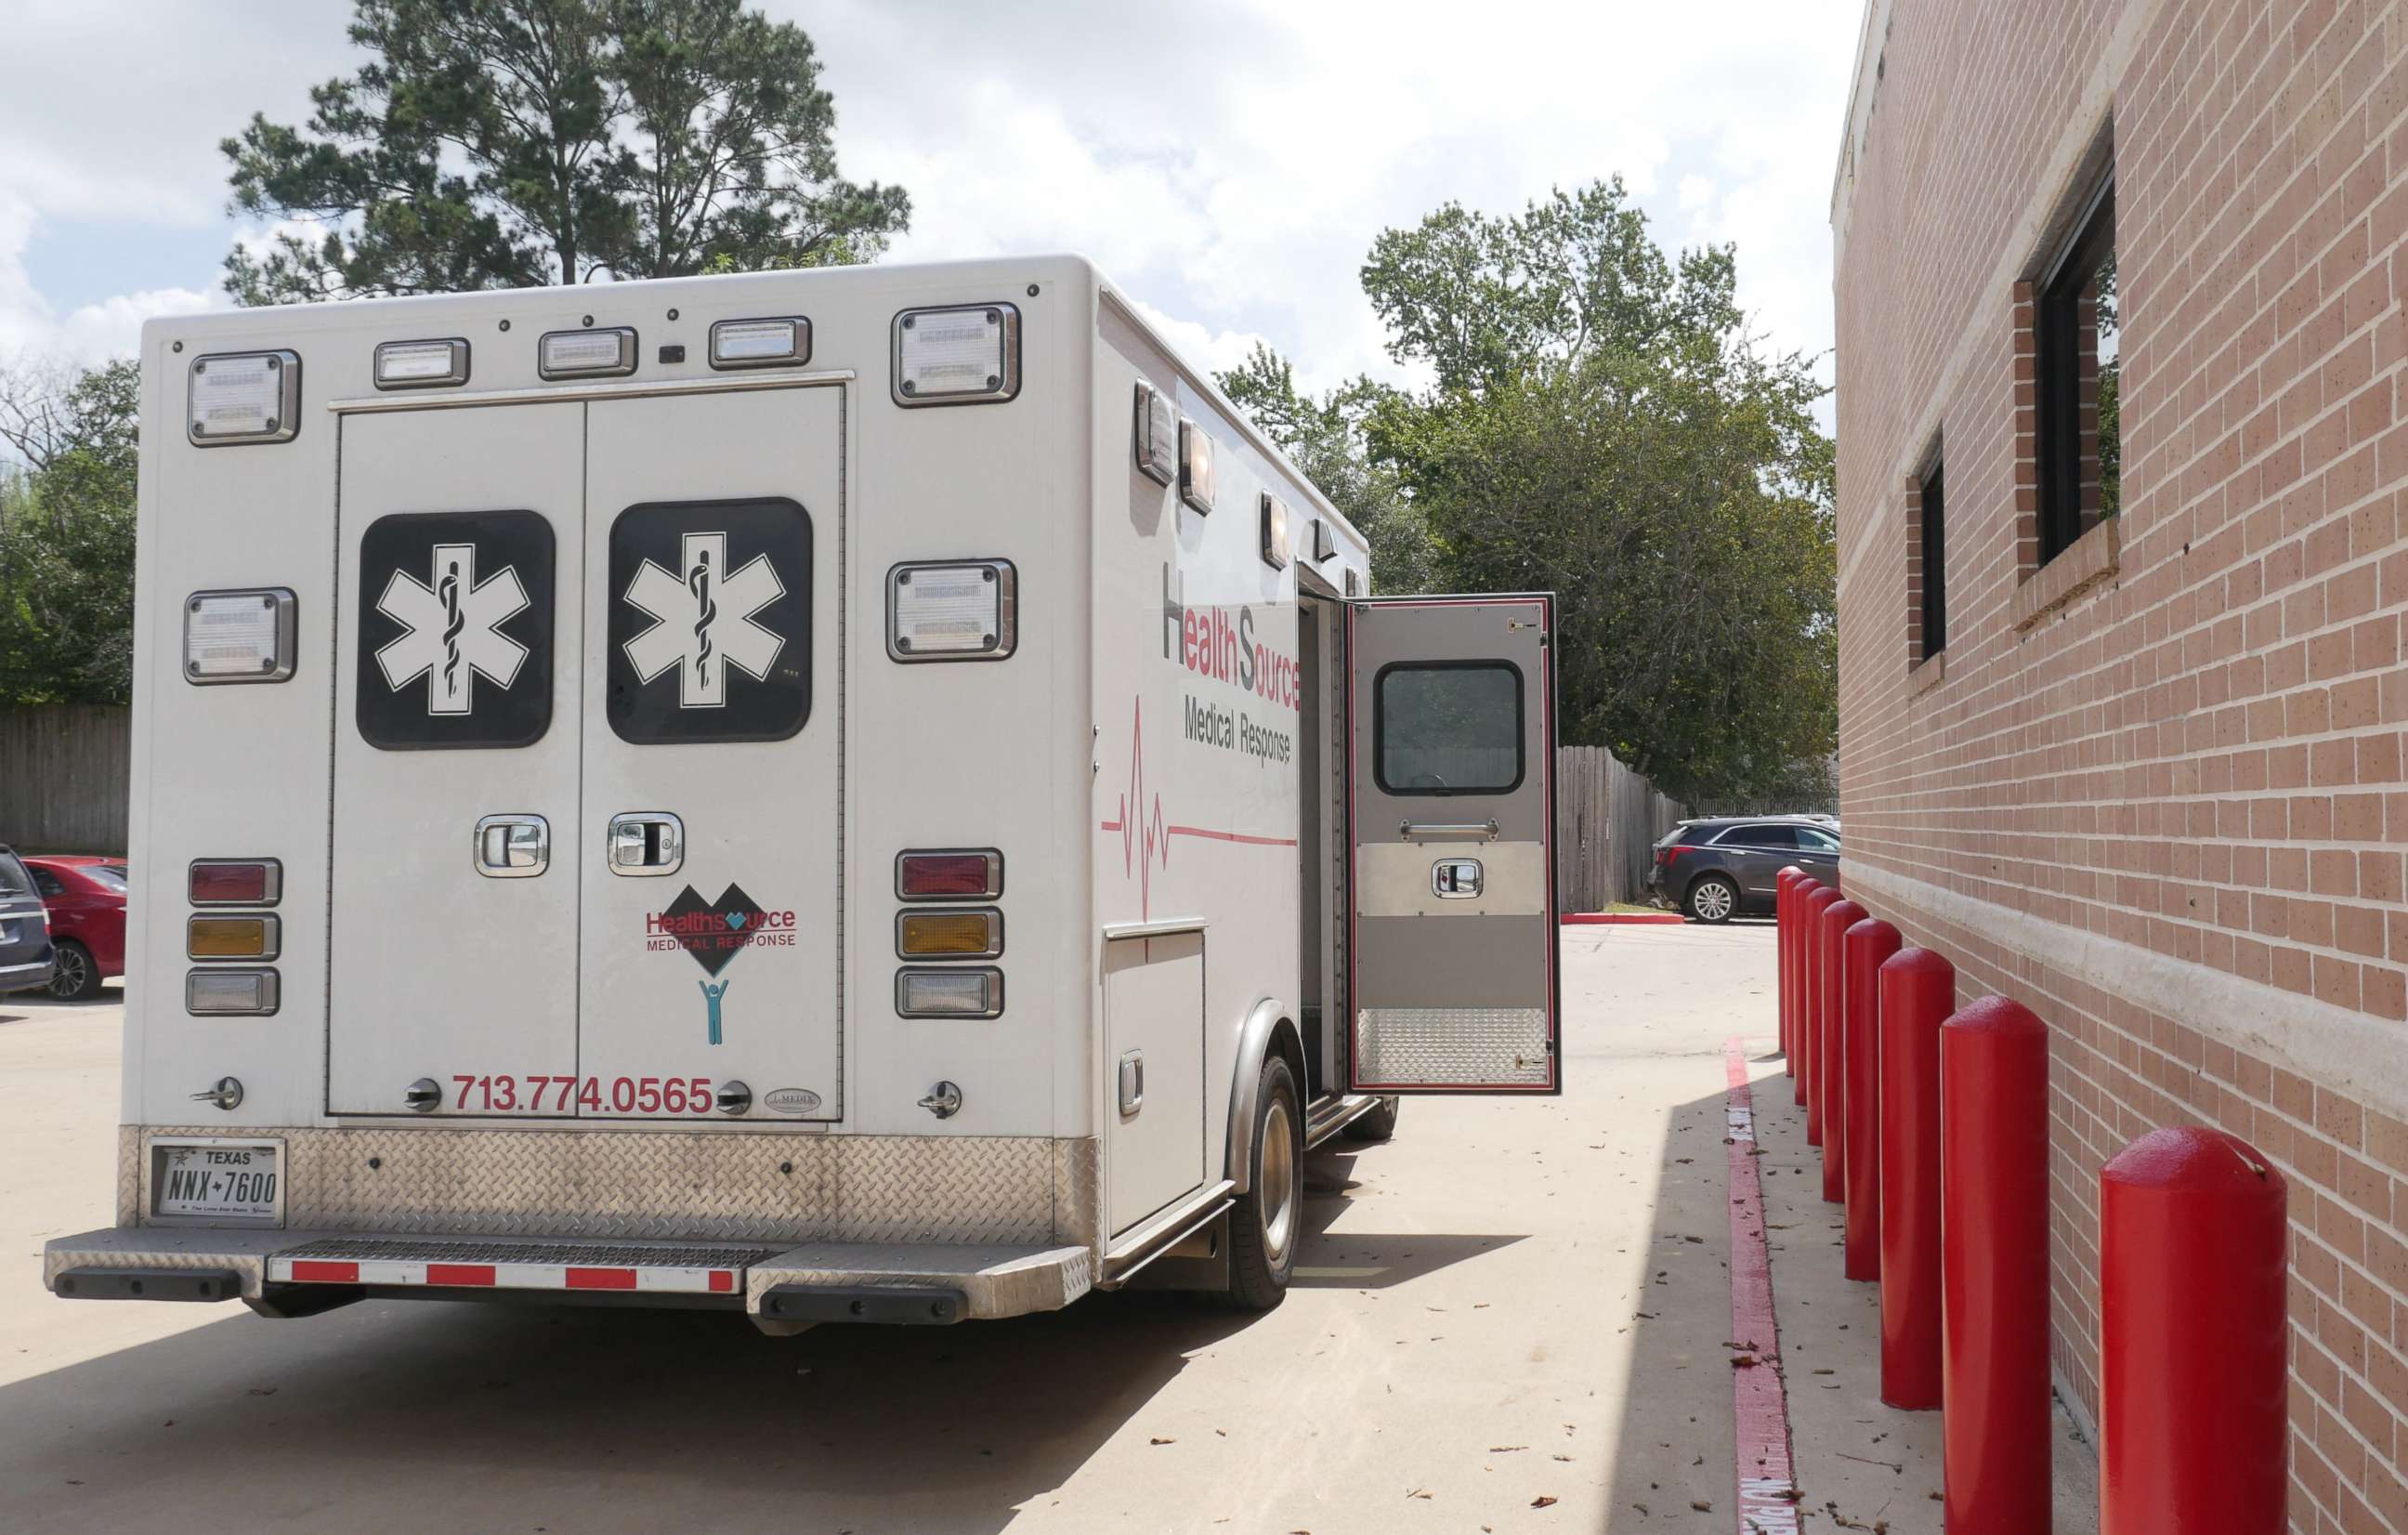 PHOTO: An ambulance is parked outside the Bellville Medical Center after dropping off a patient in Bellville, Texas, on Sept. 1, 2021.